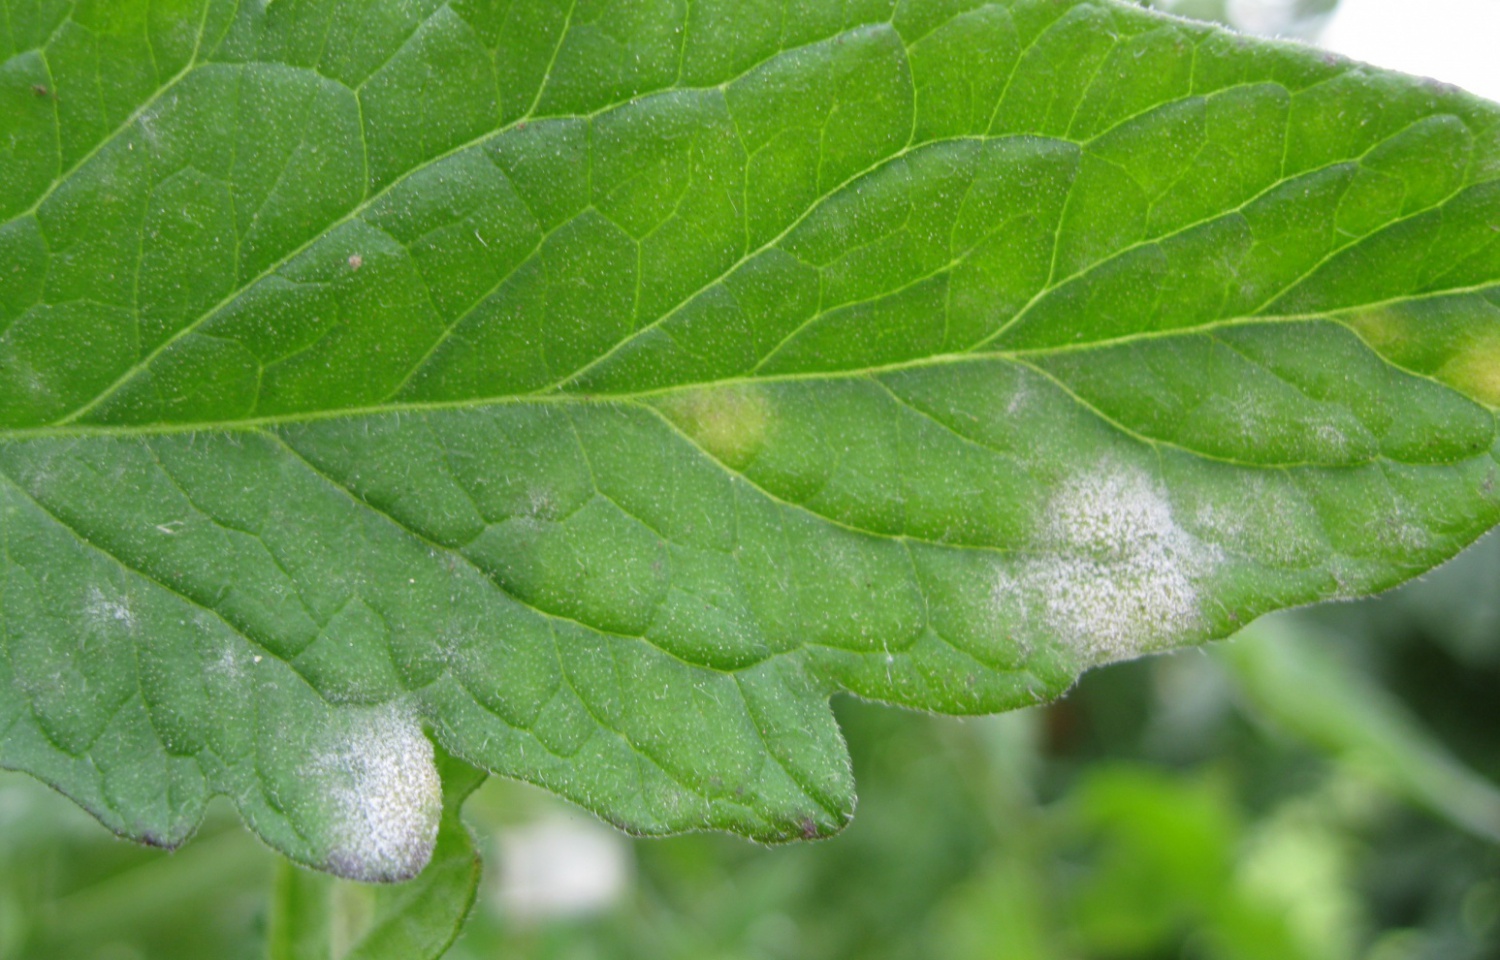 Photo of powdery mildew growing on a tomato leaf.